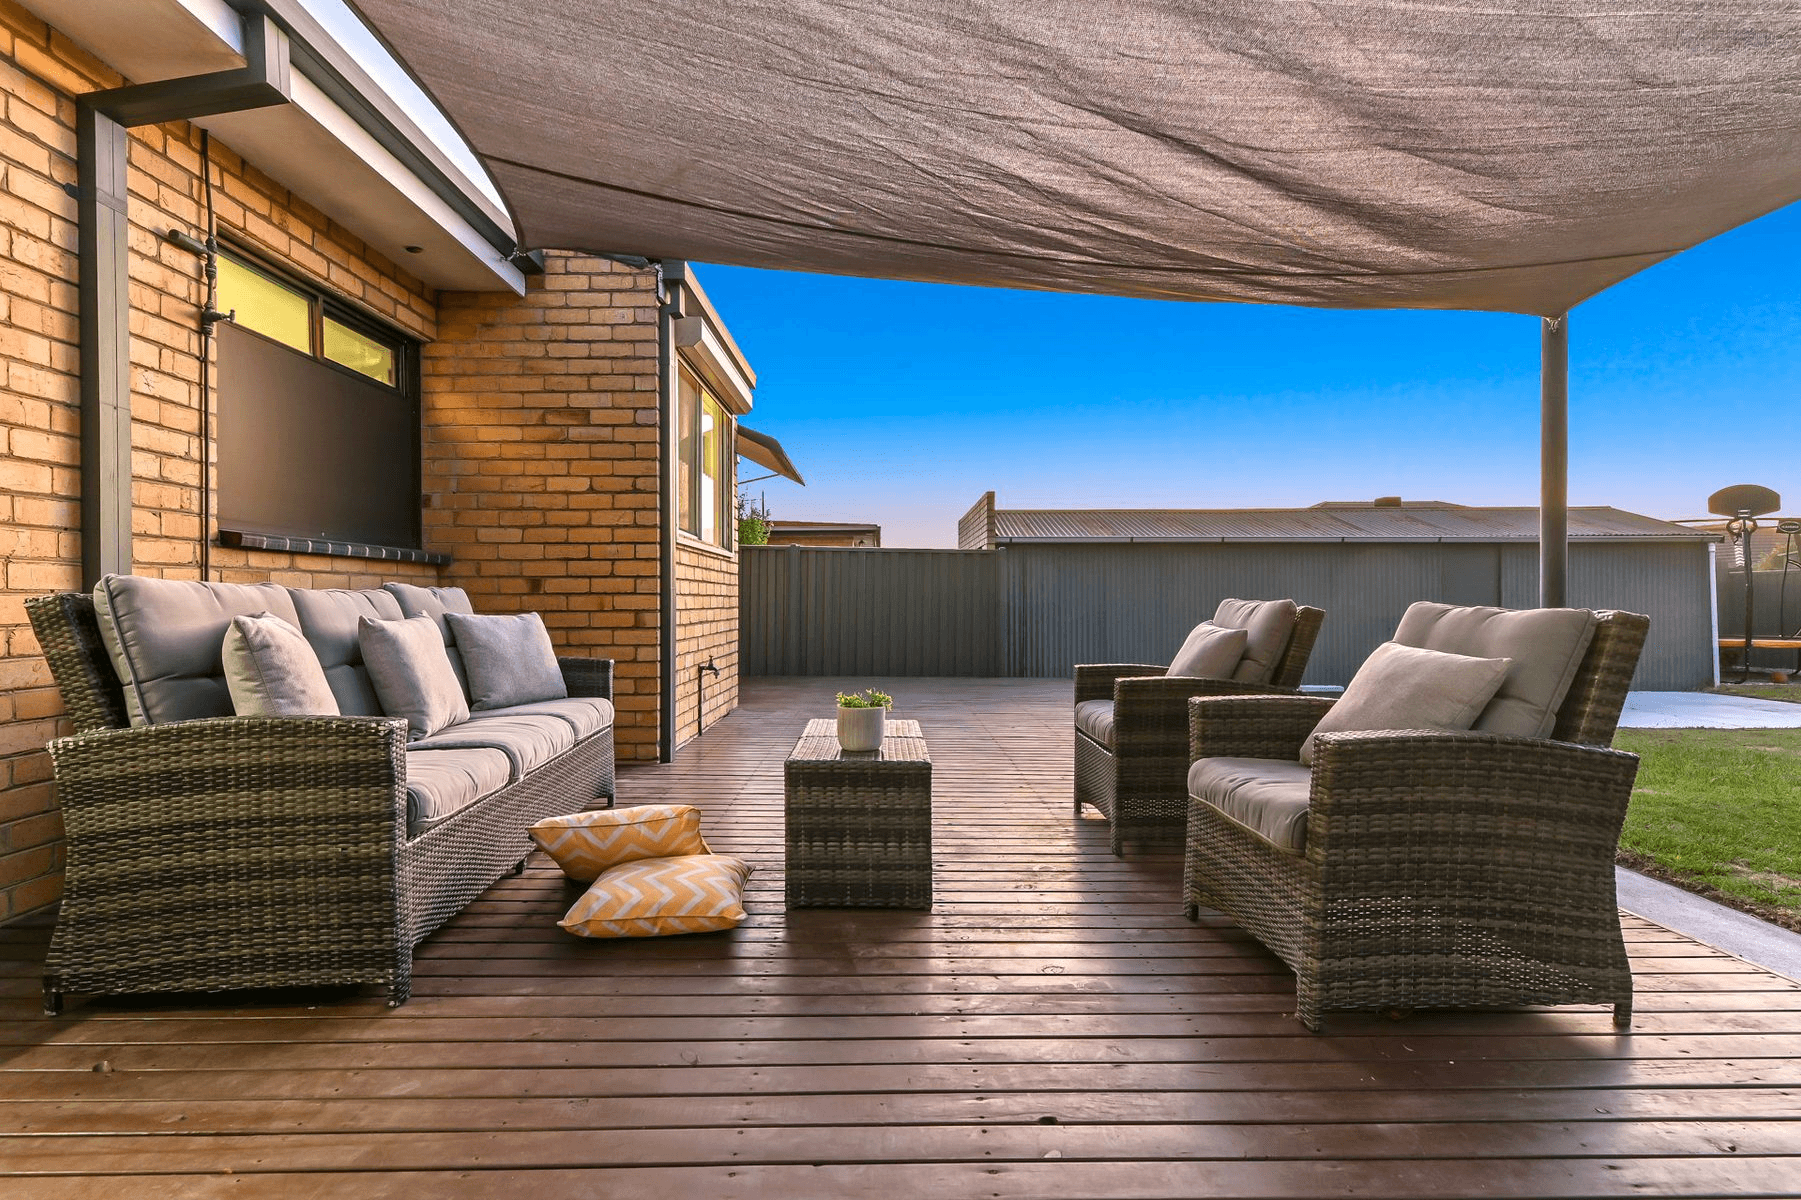 8 Brentwood Close, CLAYTON SOUTH, VIC 3169